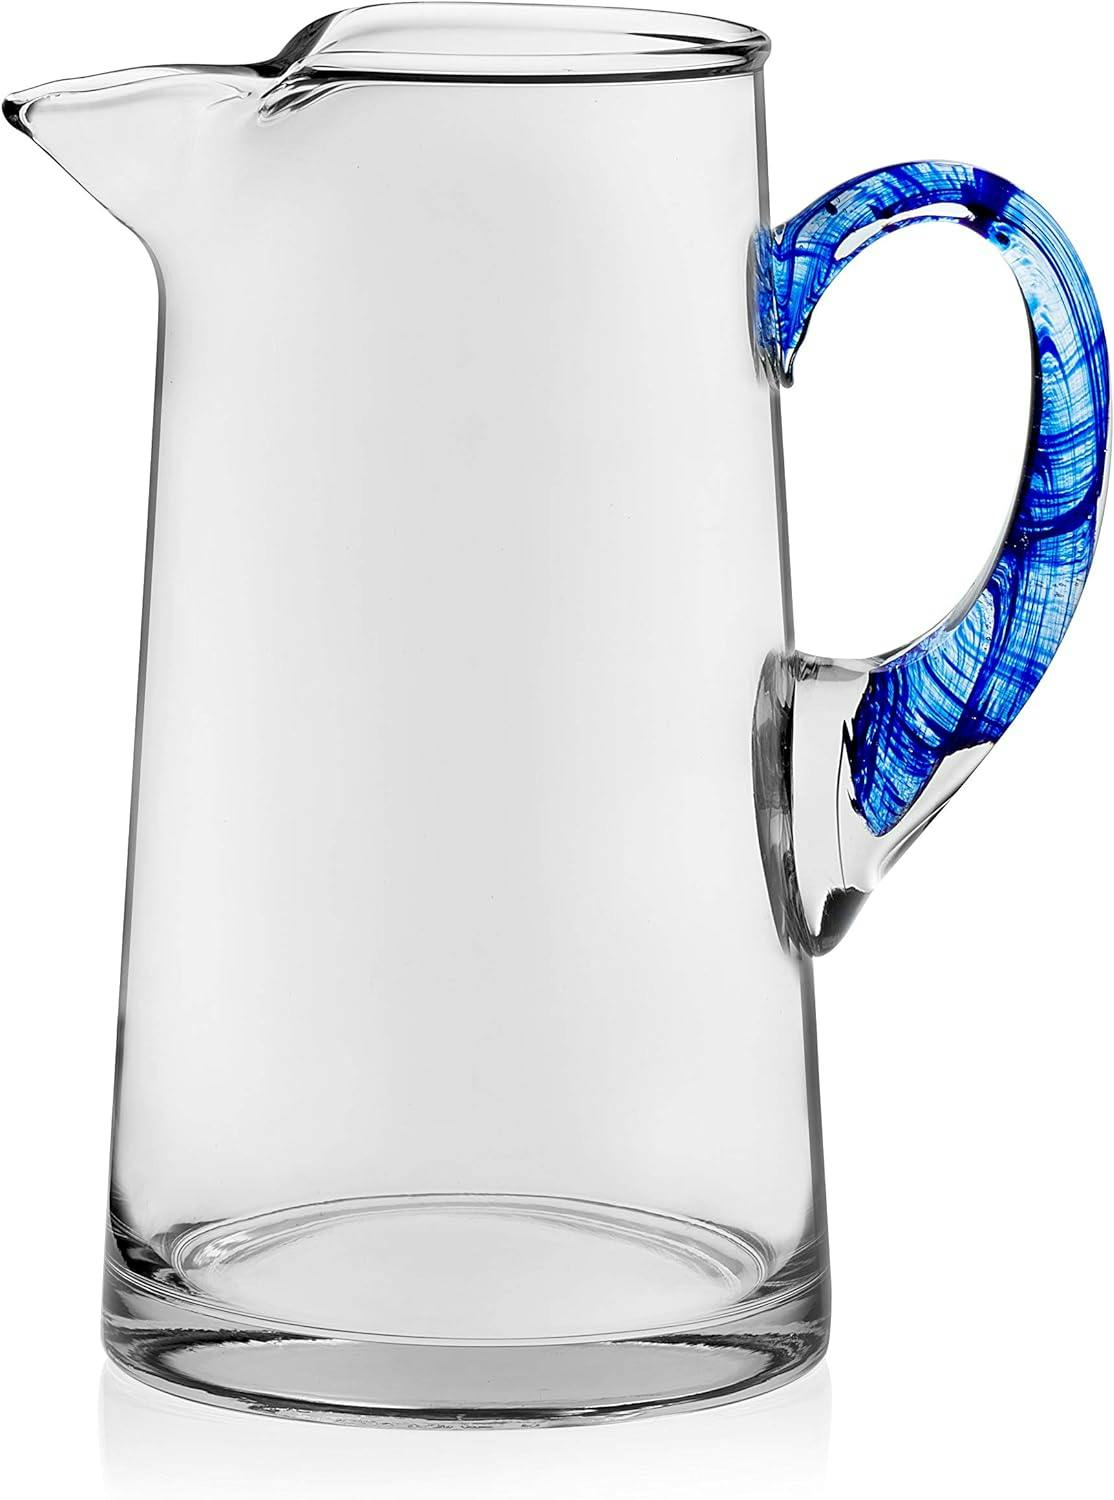 Cabos Artisan 90oz Handled Glass Pitcher with Blue Streaks